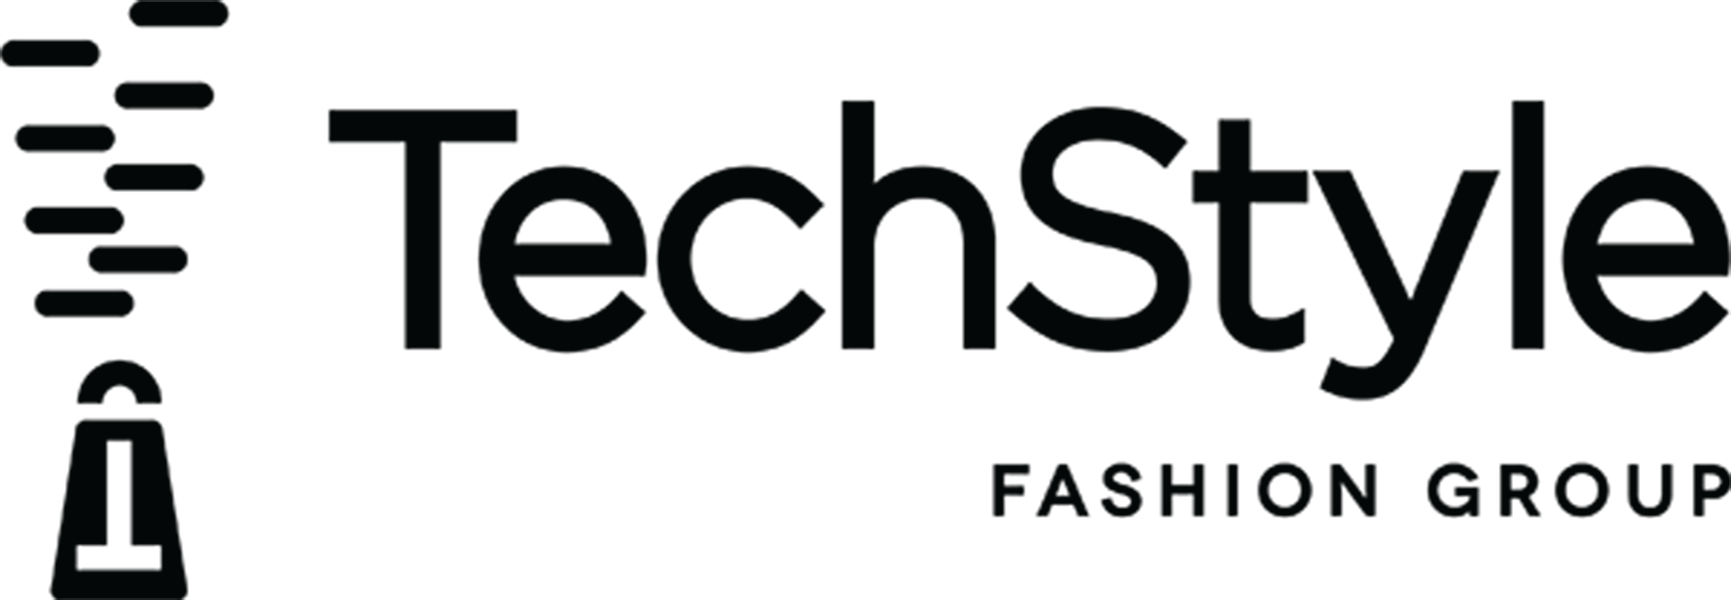 TechStyleLogo_small.png